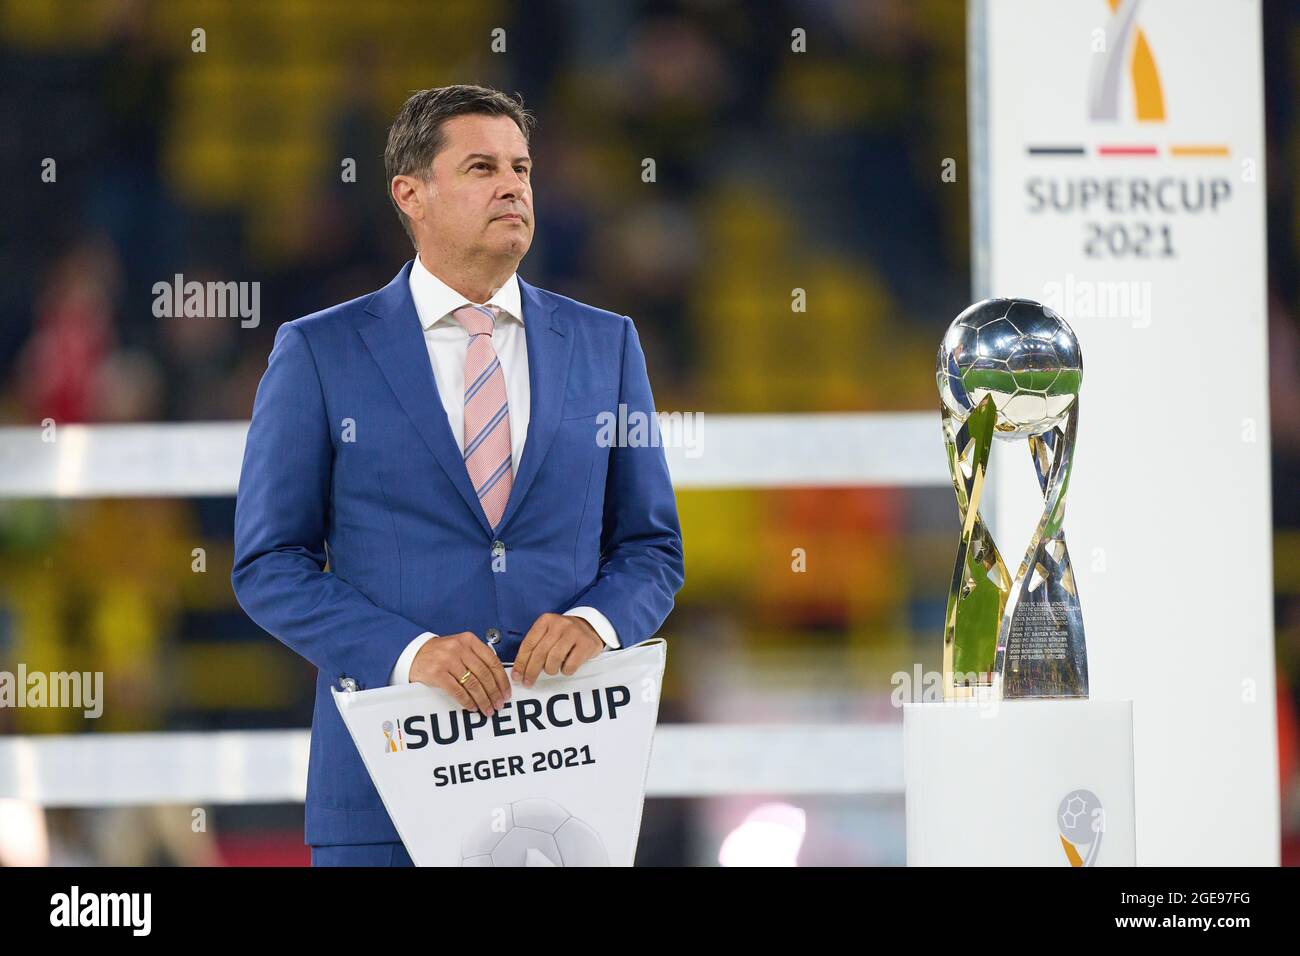 Christian SEIFERT, CEO, managing director DFL Deutsche Fußball Liga GmbH, DFL board member, with trophy in the Final DFL Super Cup match BORUSSIA DORTMUND - FC BAYERN MÜNCHEN 1-3 on August 17, 2021 in Dortmund, Germany  Season 2020/2021, BVB, Muenchen, Munich, Bavaria © Peter Schatz / Alamy Live News    - DFL REGULATIONS PROHIBIT ANY USE OF PHOTOGRAPHS as IMAGE SEQUENCES and/or QUASI-VIDEO - Stock Photo